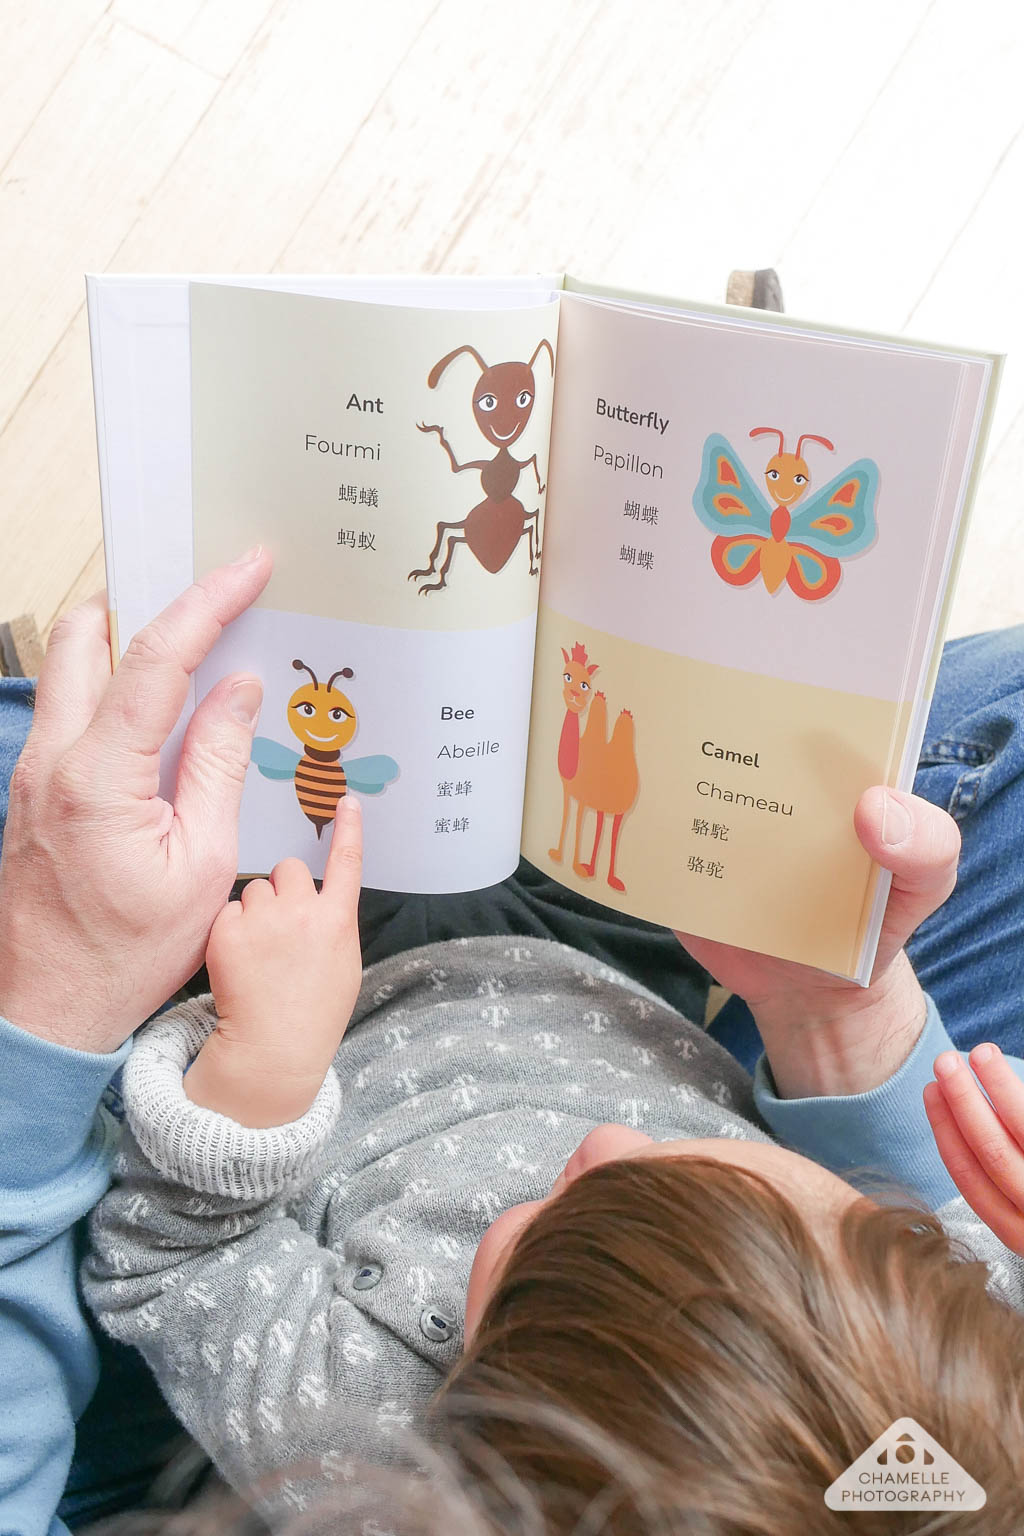 Customizable multilingual children's picture books - Kid of the World